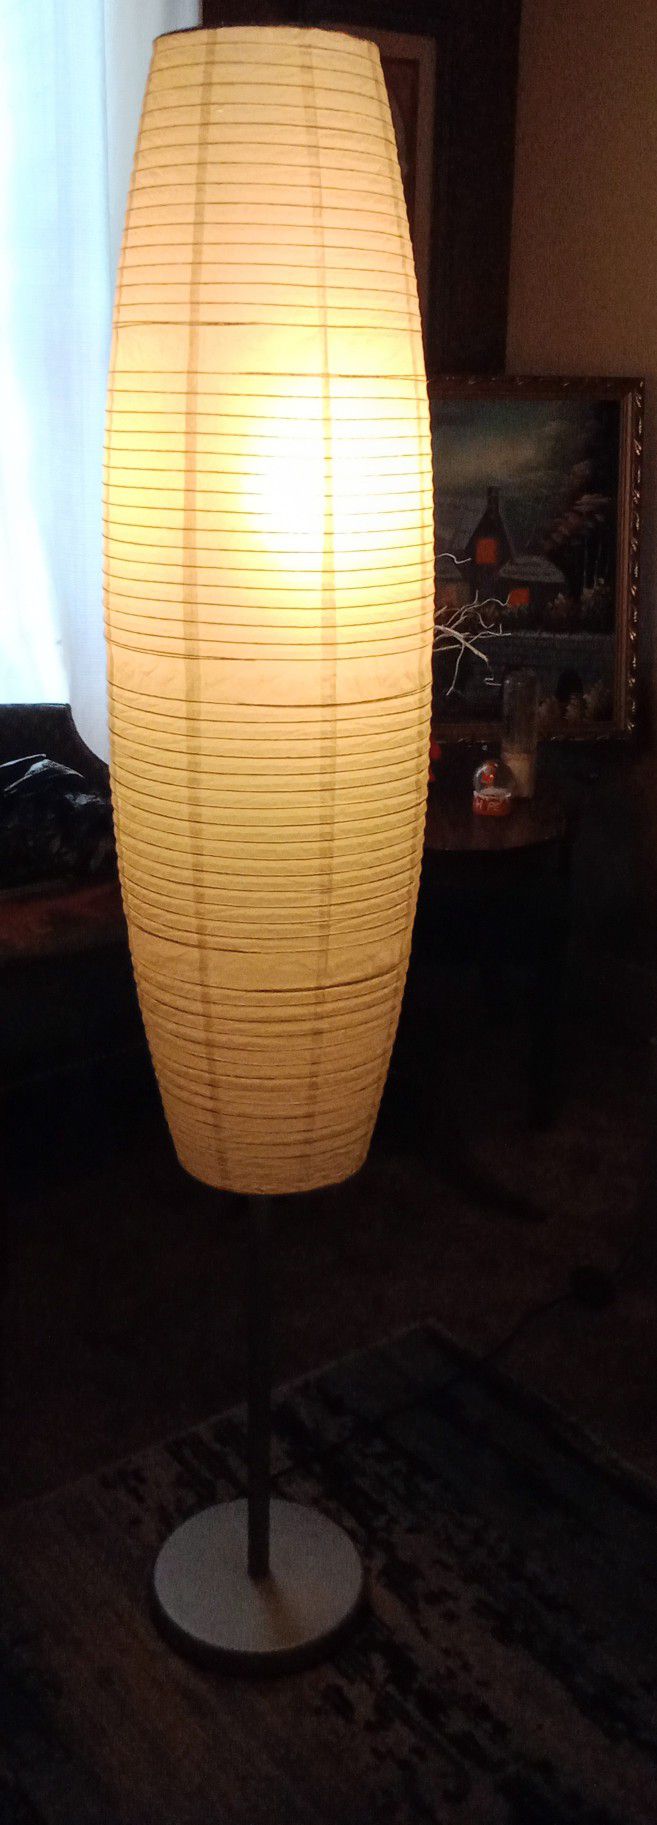 VINTAGE FLOOR LAMP WITH RICE PAPER SHADE!